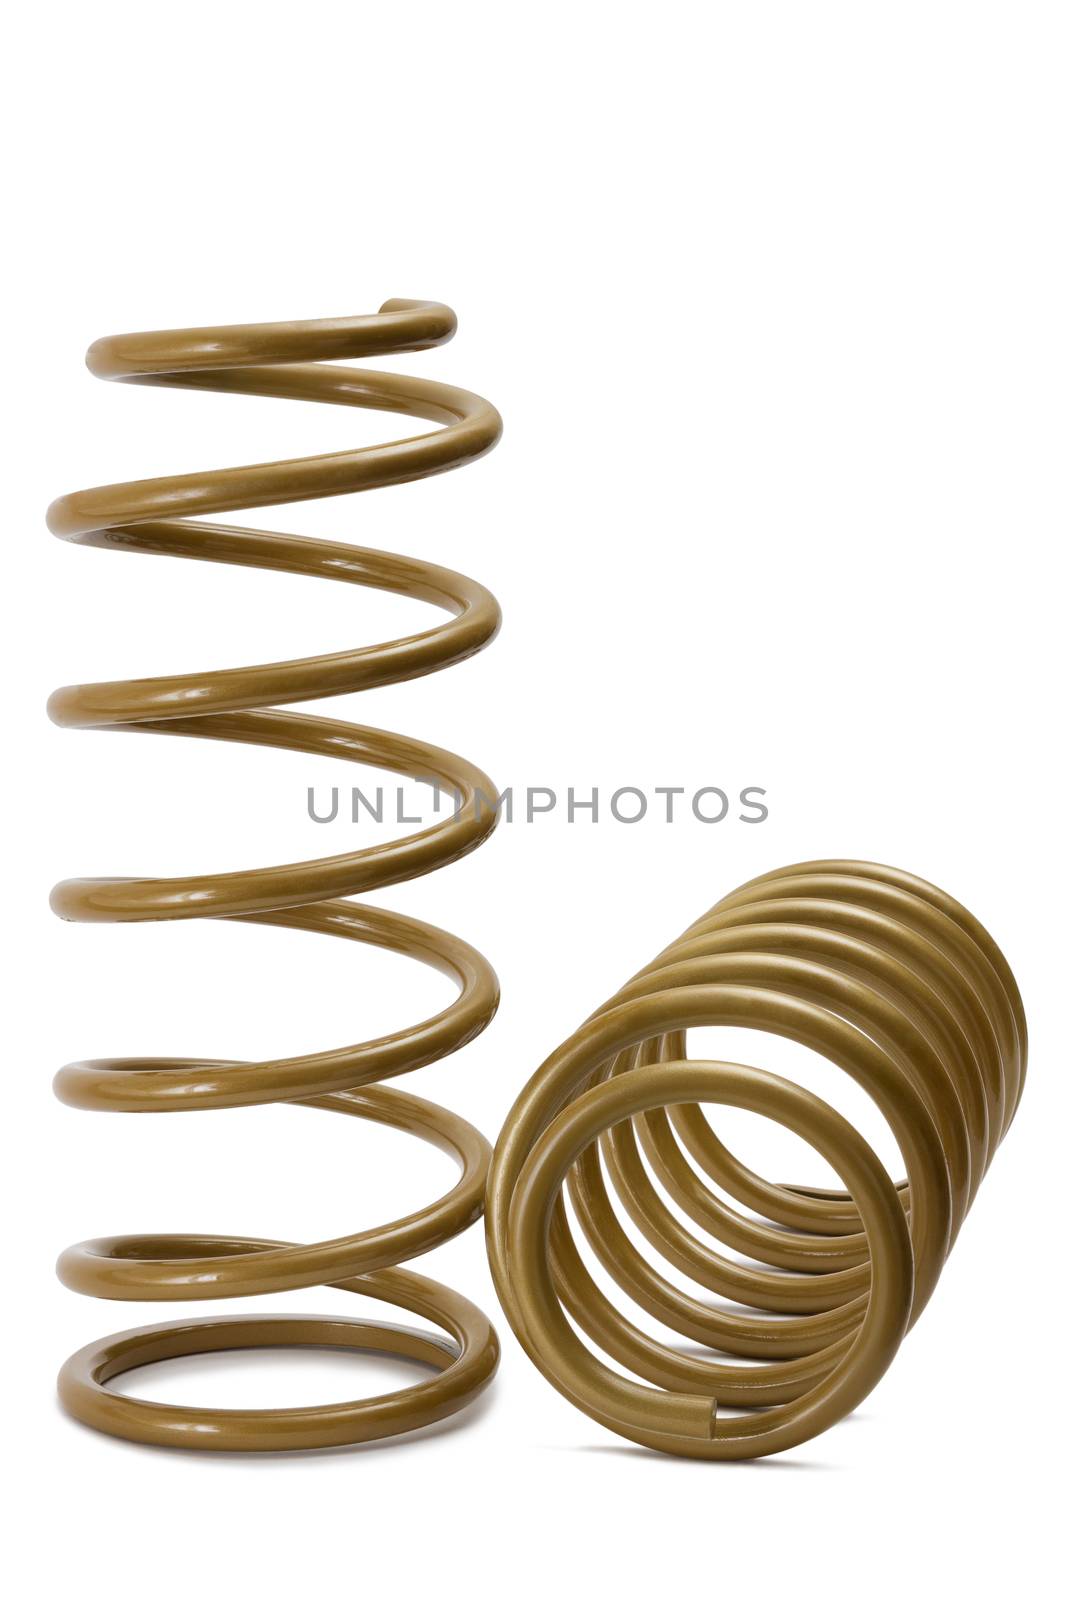 car spring isolated on white background
